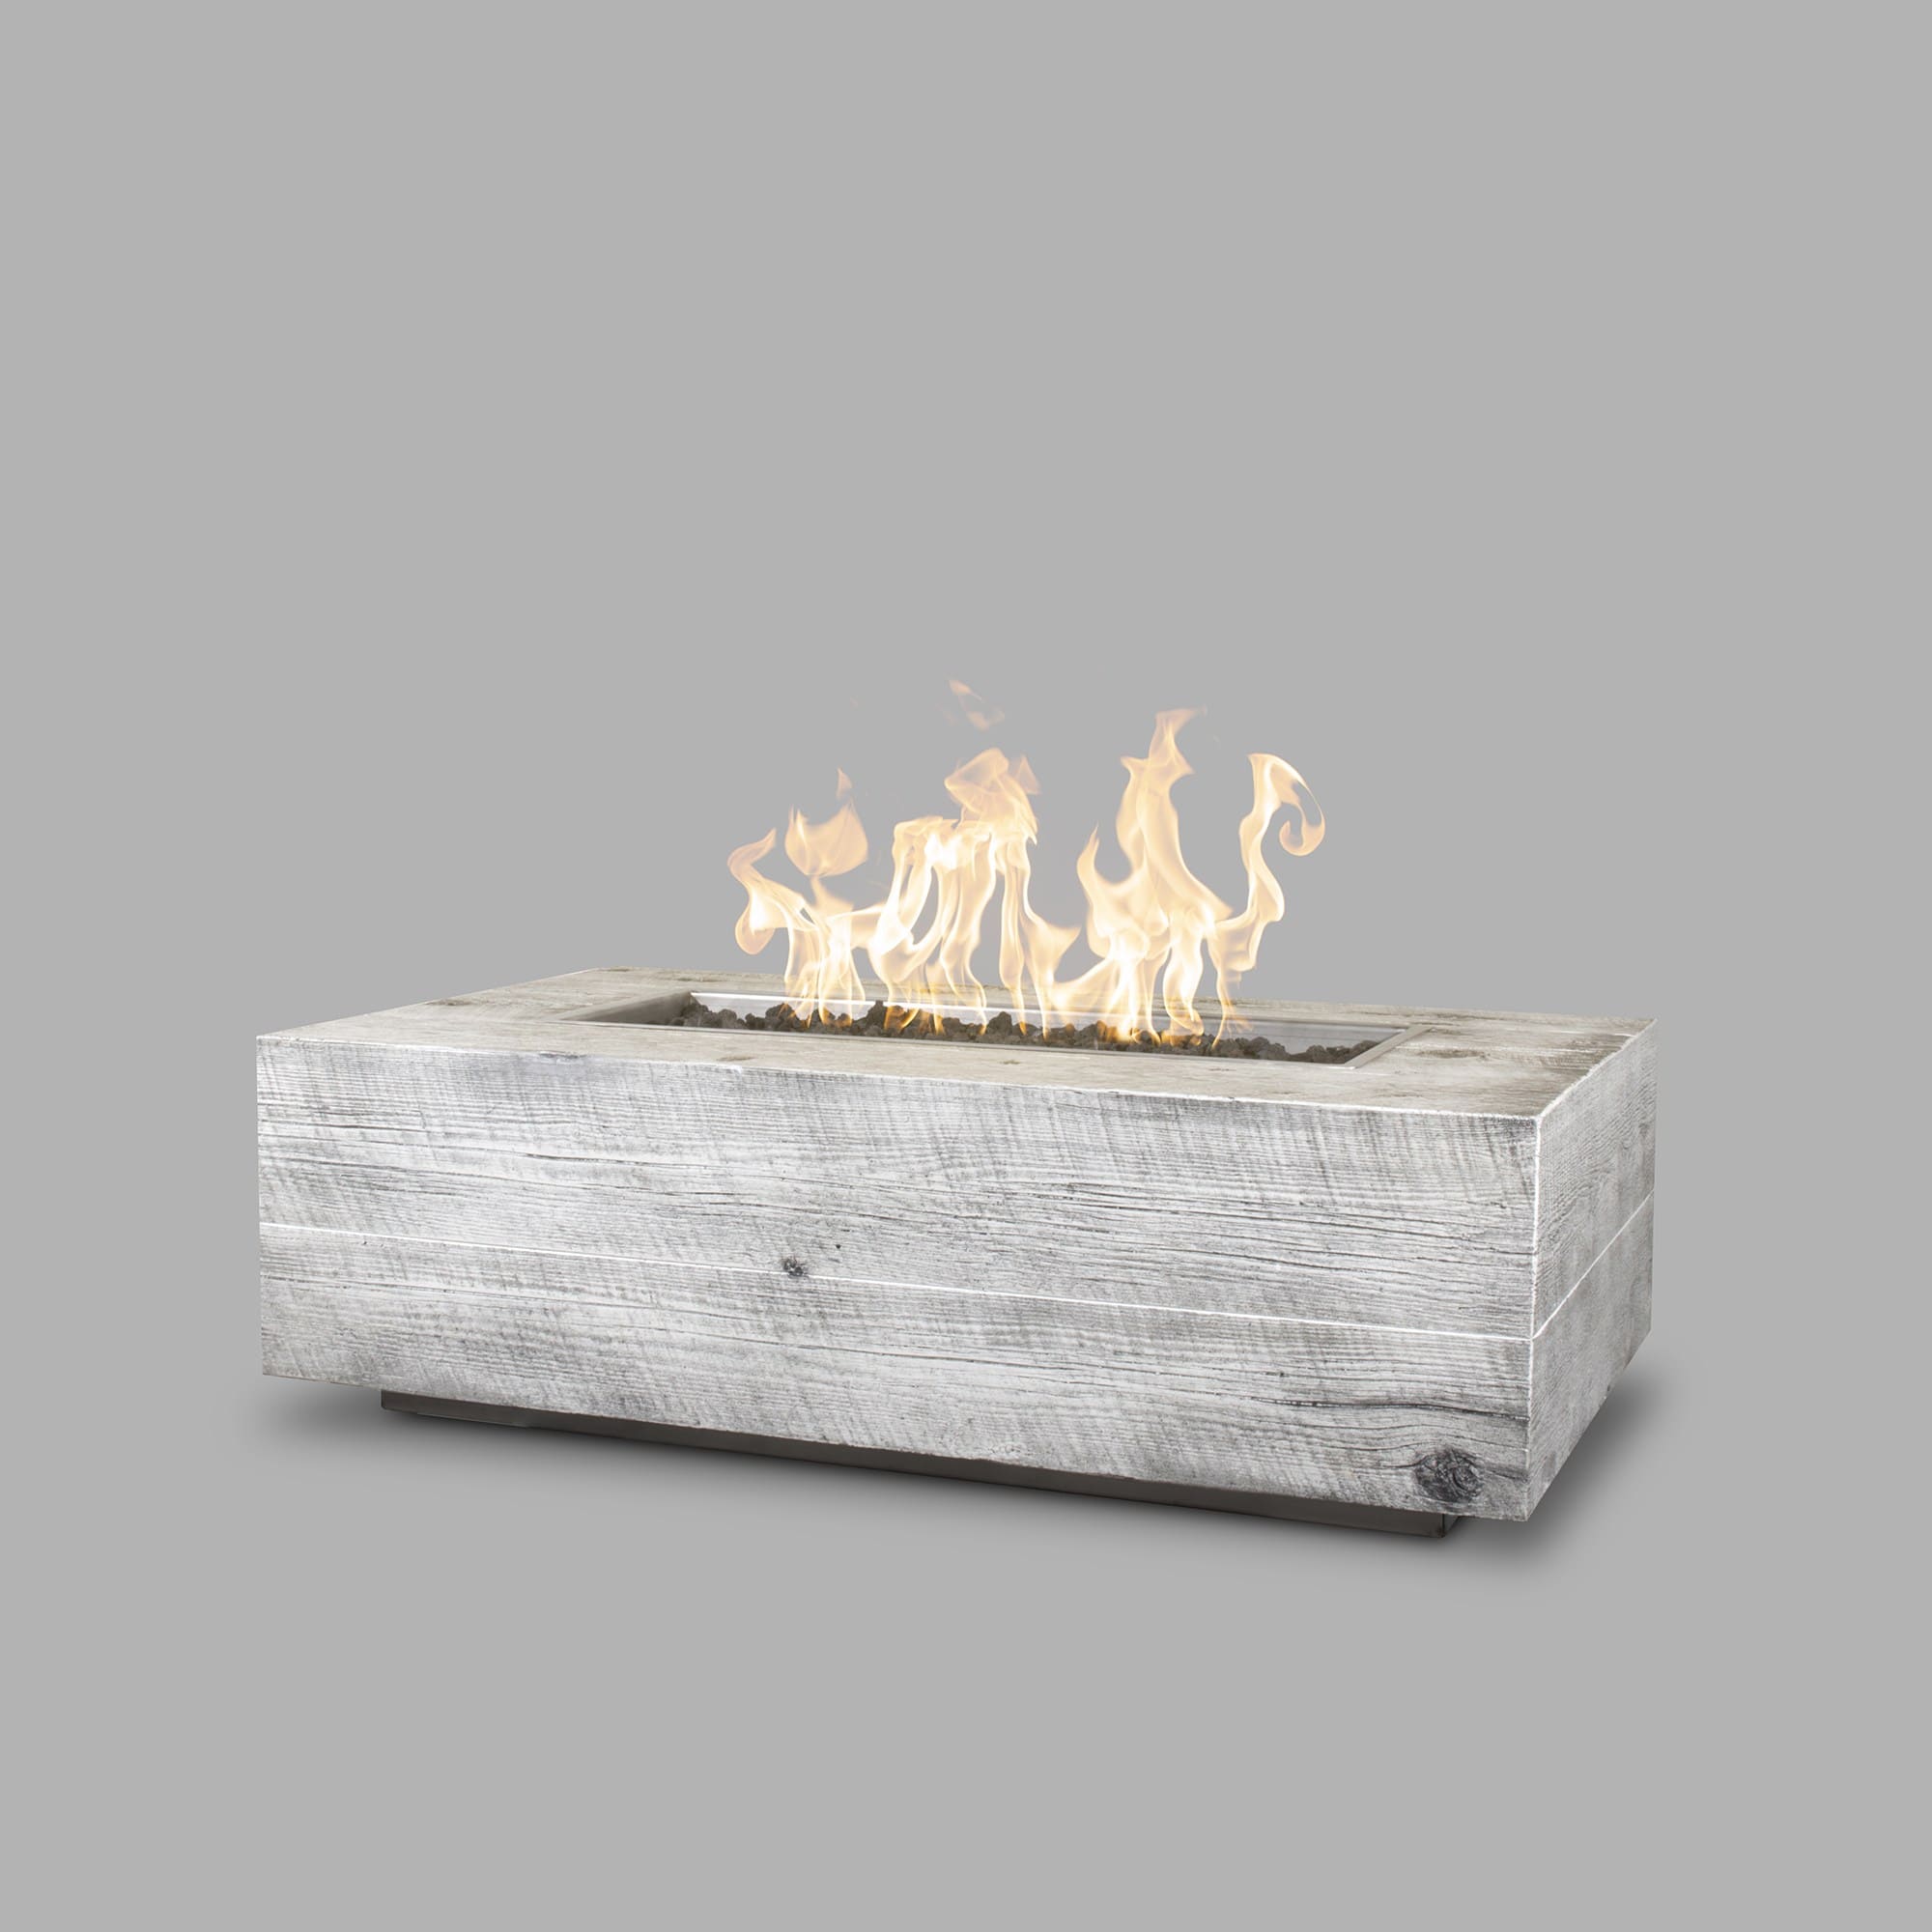 The Outdoor Plus Coronado Wood Grain Fire Pit in Ivorywith flame on white background 3